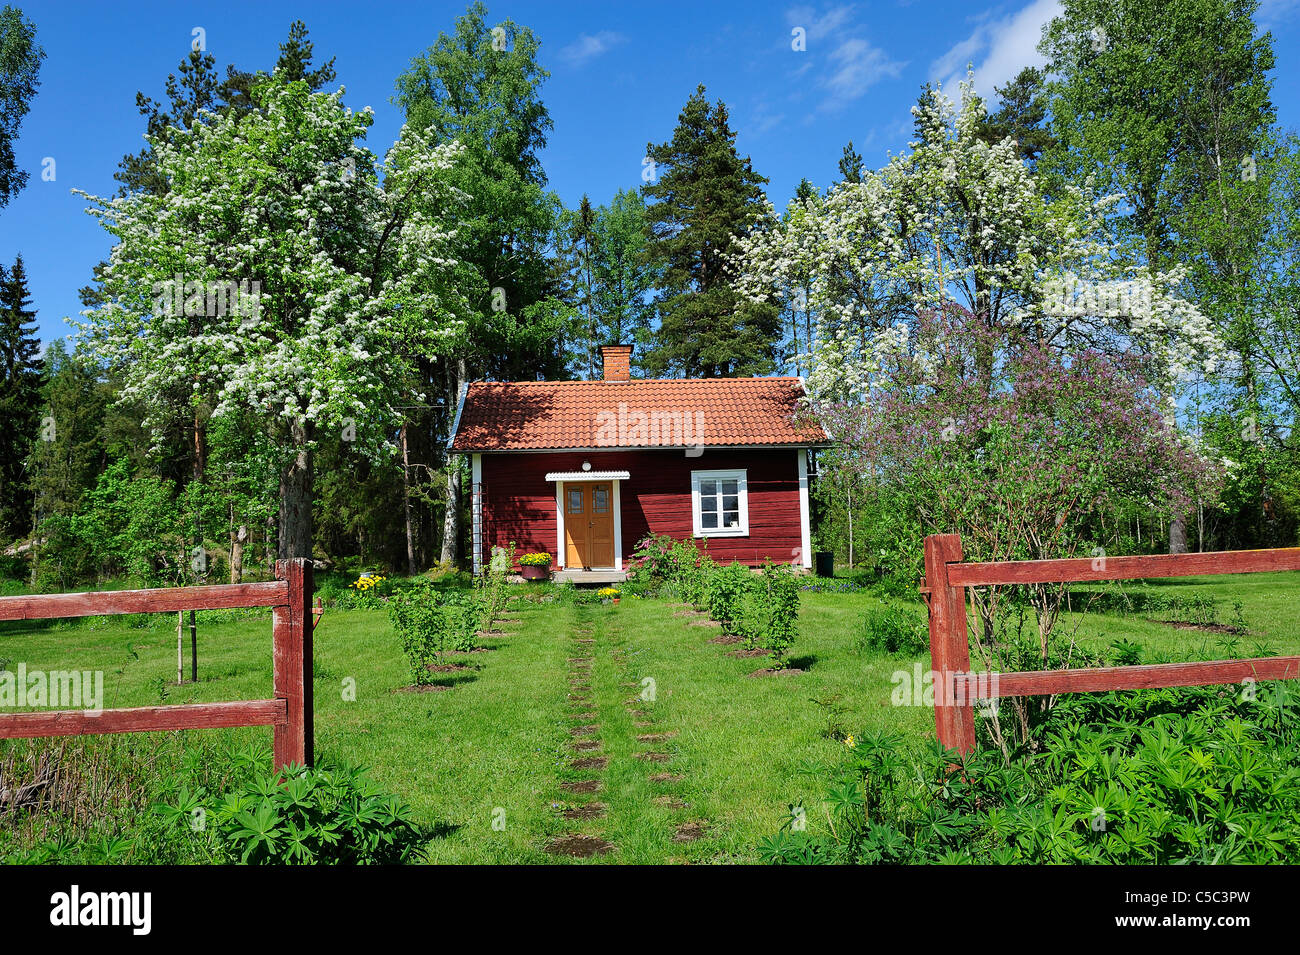 Entrance of a fenced small red cottage against trees Stock Photo